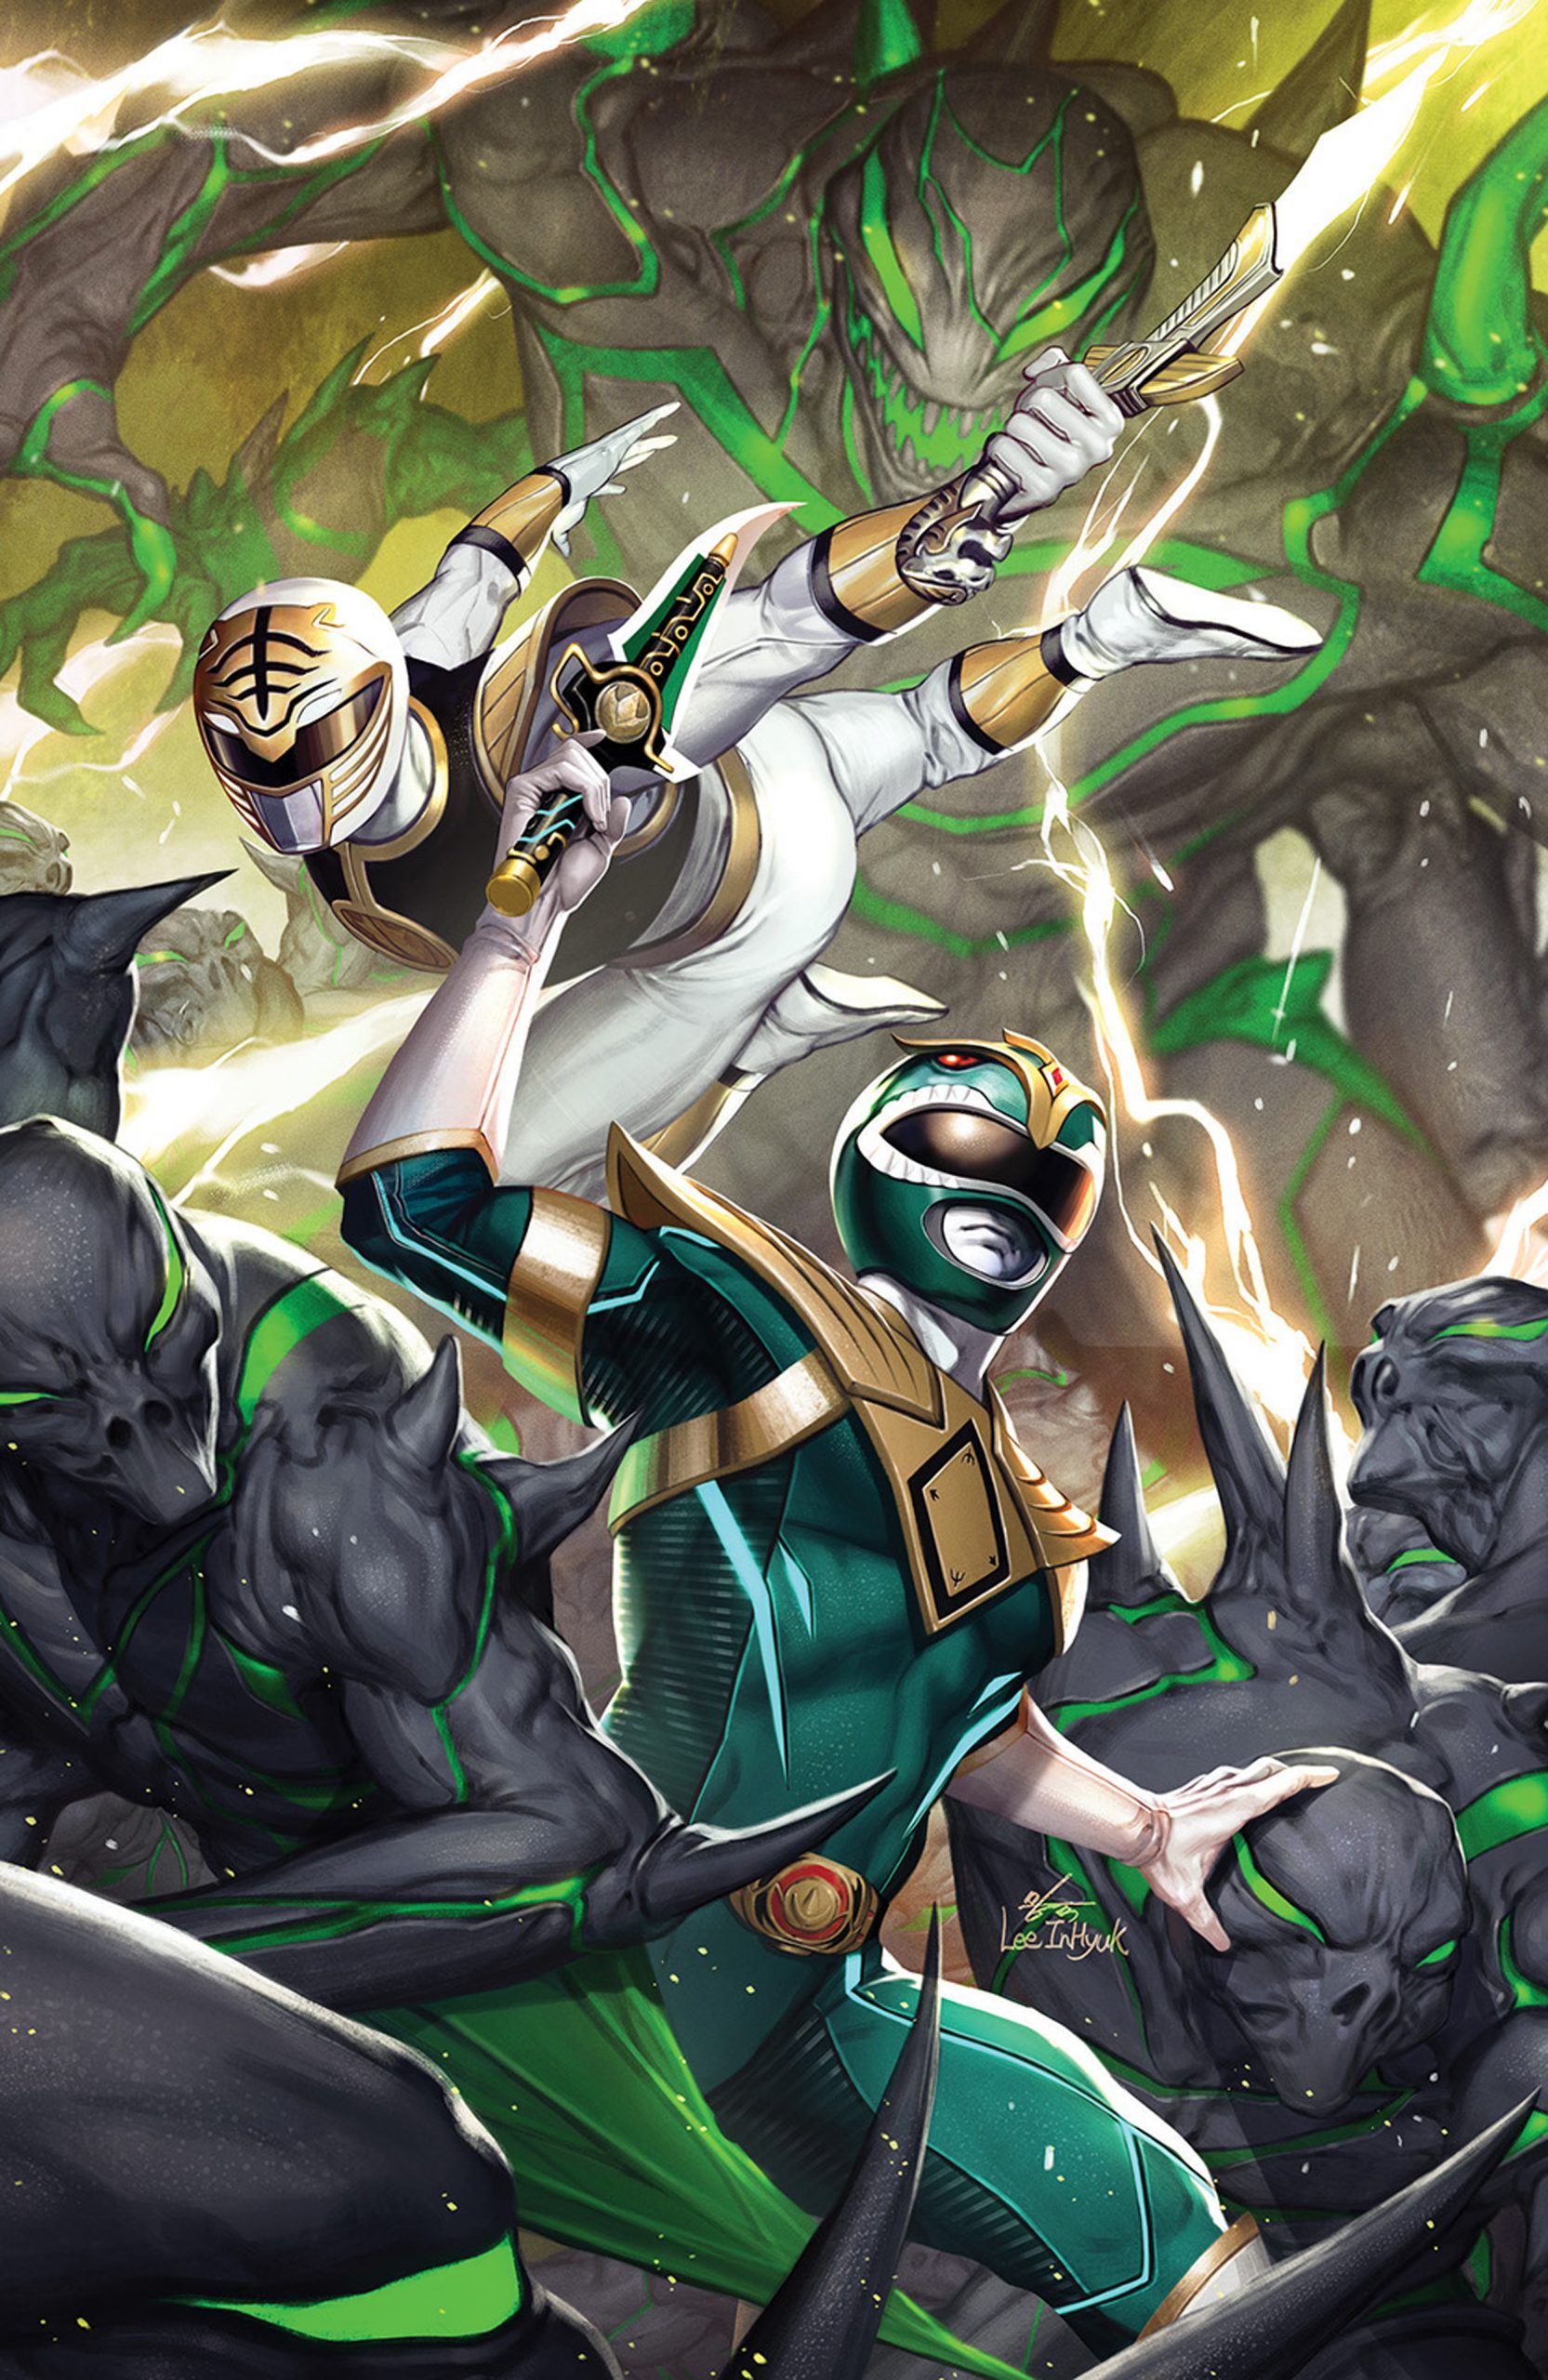 COMIC PREVIEW - MIGHTY MORPHIN Issue 3 - Ranger Command Power Hour